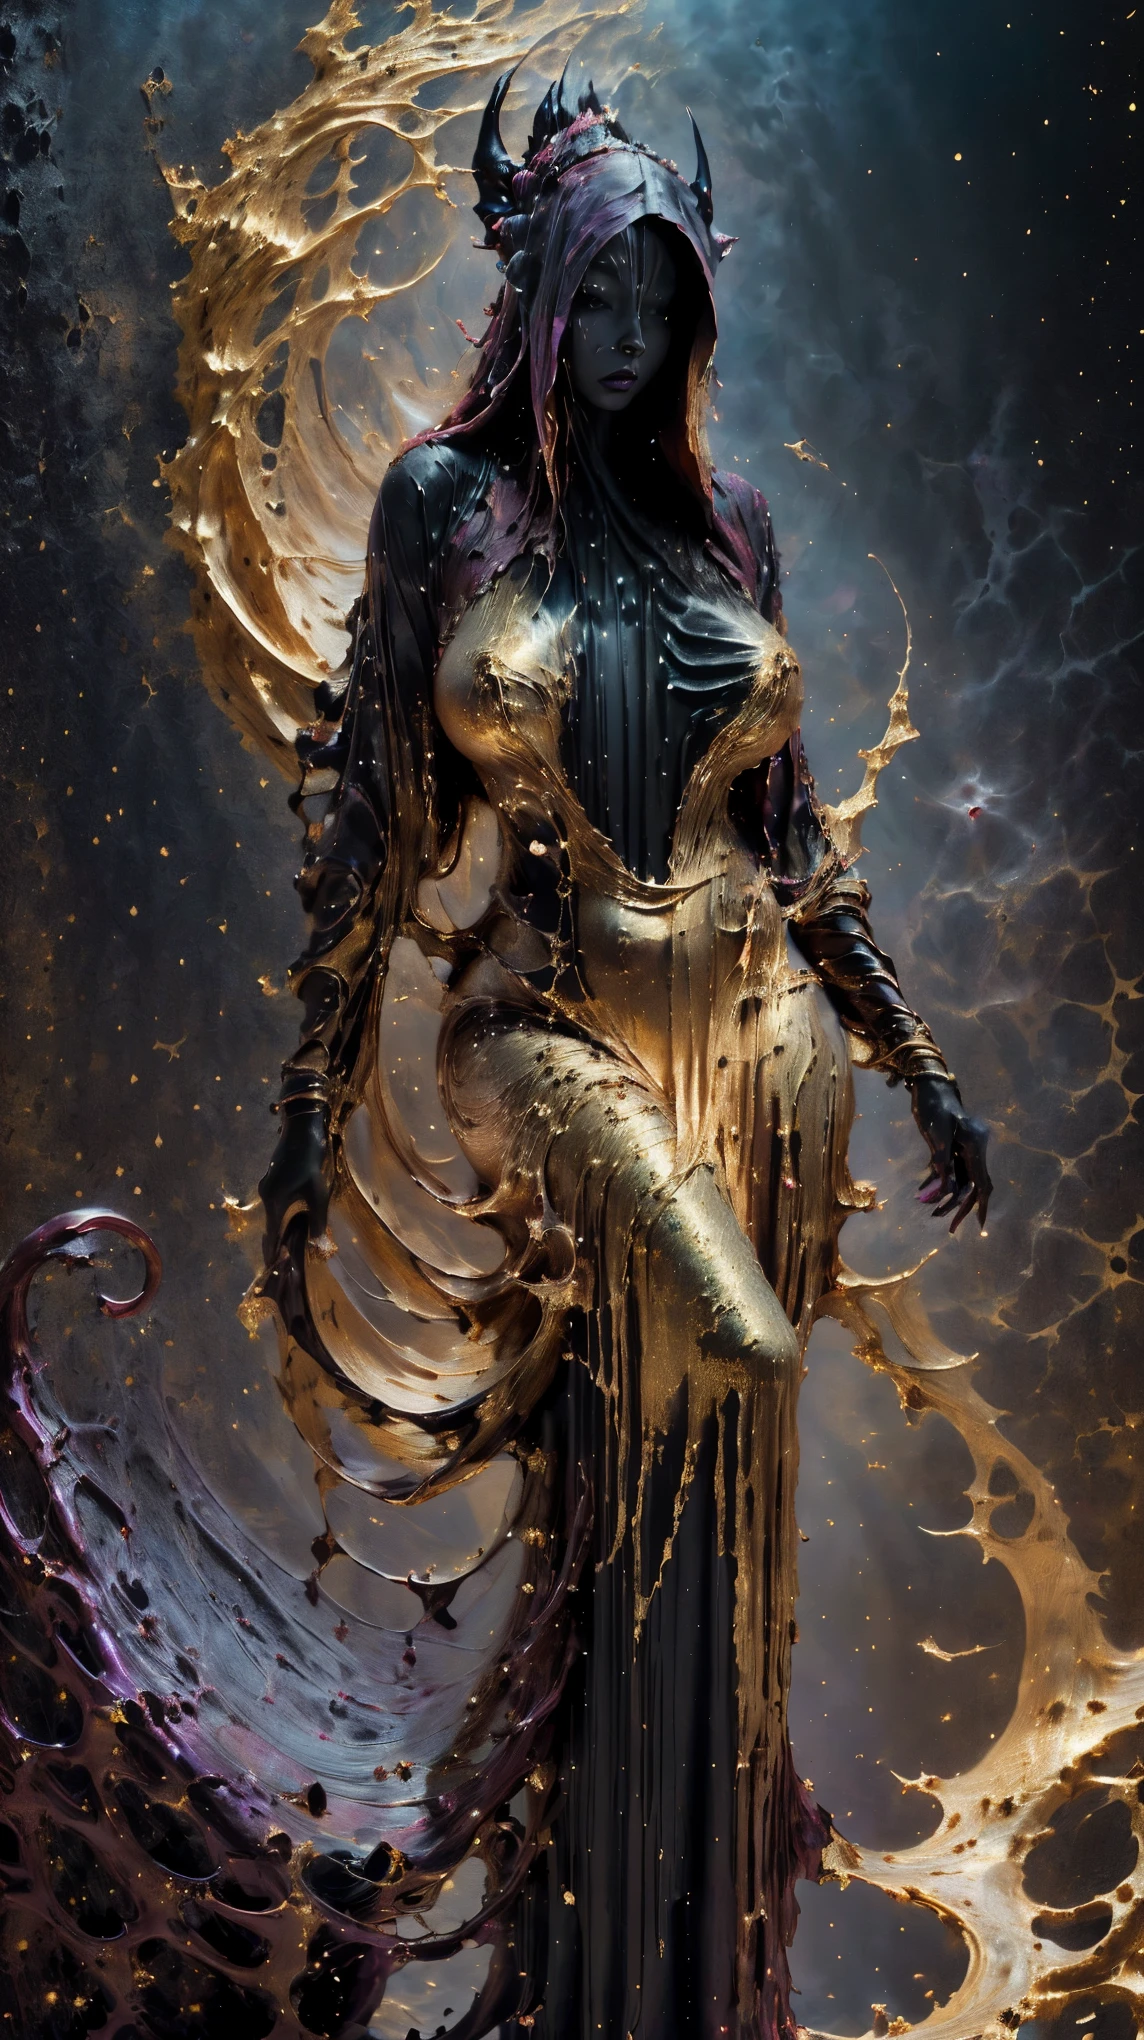 (body formed by galactic liquid mauevine and black metallic paint twisting into a beautiful interpretation of the female figure), au naturel,((complex galactic metallic colours in the foreground)), (( fluid mechanics, the loveliest smooth scale face makeup, smirky expression)) - red, black and gold, onyxia, metallic color palette g0s1，ezh，black flowers